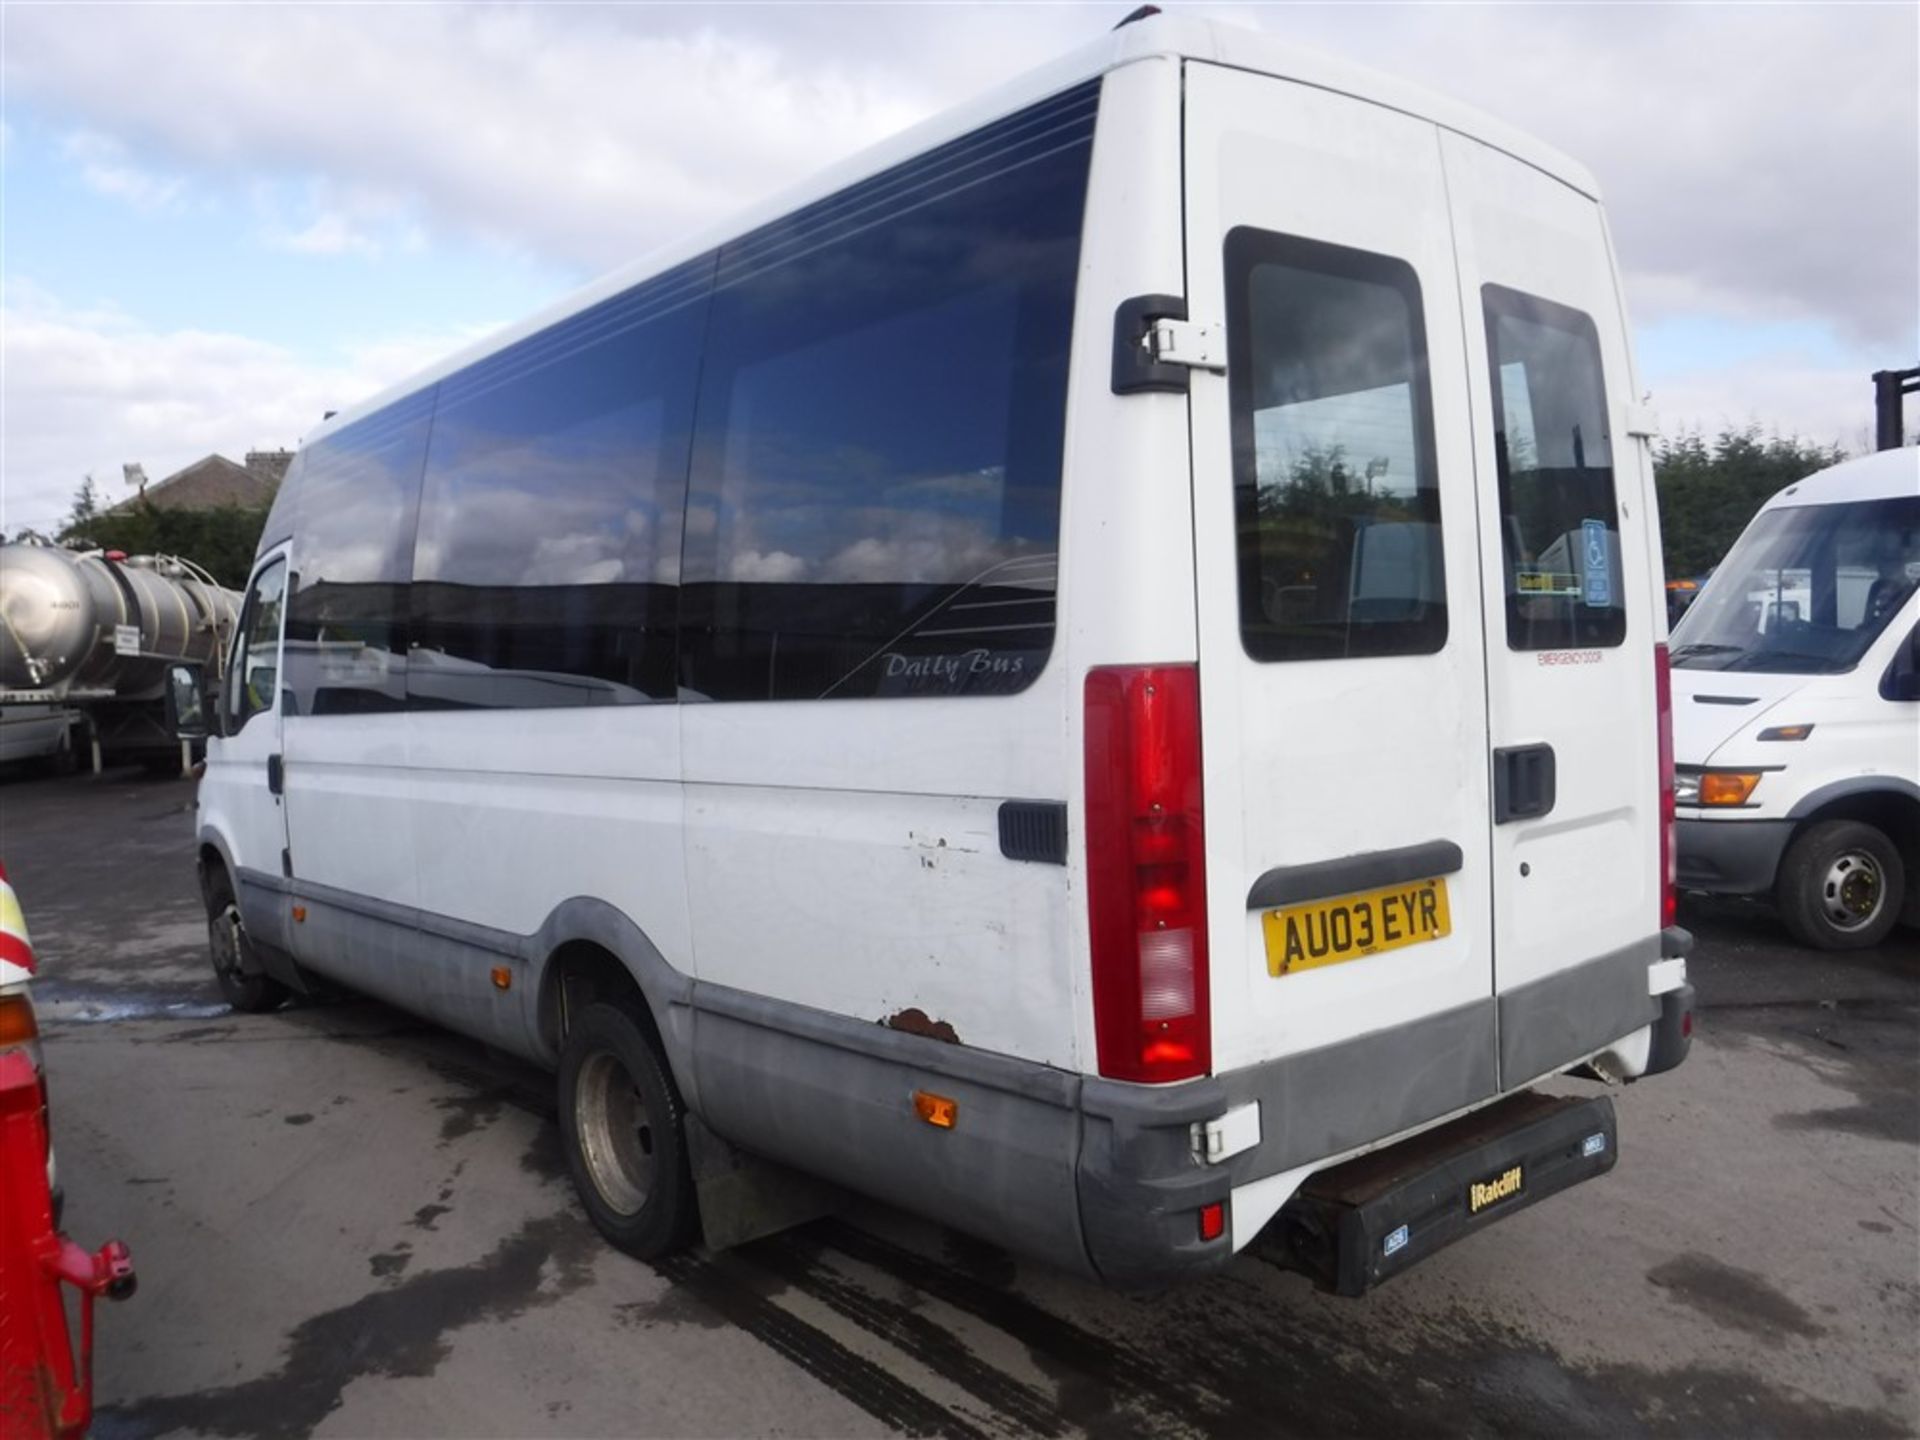 03 reg IVECO DAILY 40C13 IRIS BUS, 1ST REG 03/03, TEST 03/19, 105672KM WARRANTED, V5 HERE, 1 OWNER - Image 3 of 6